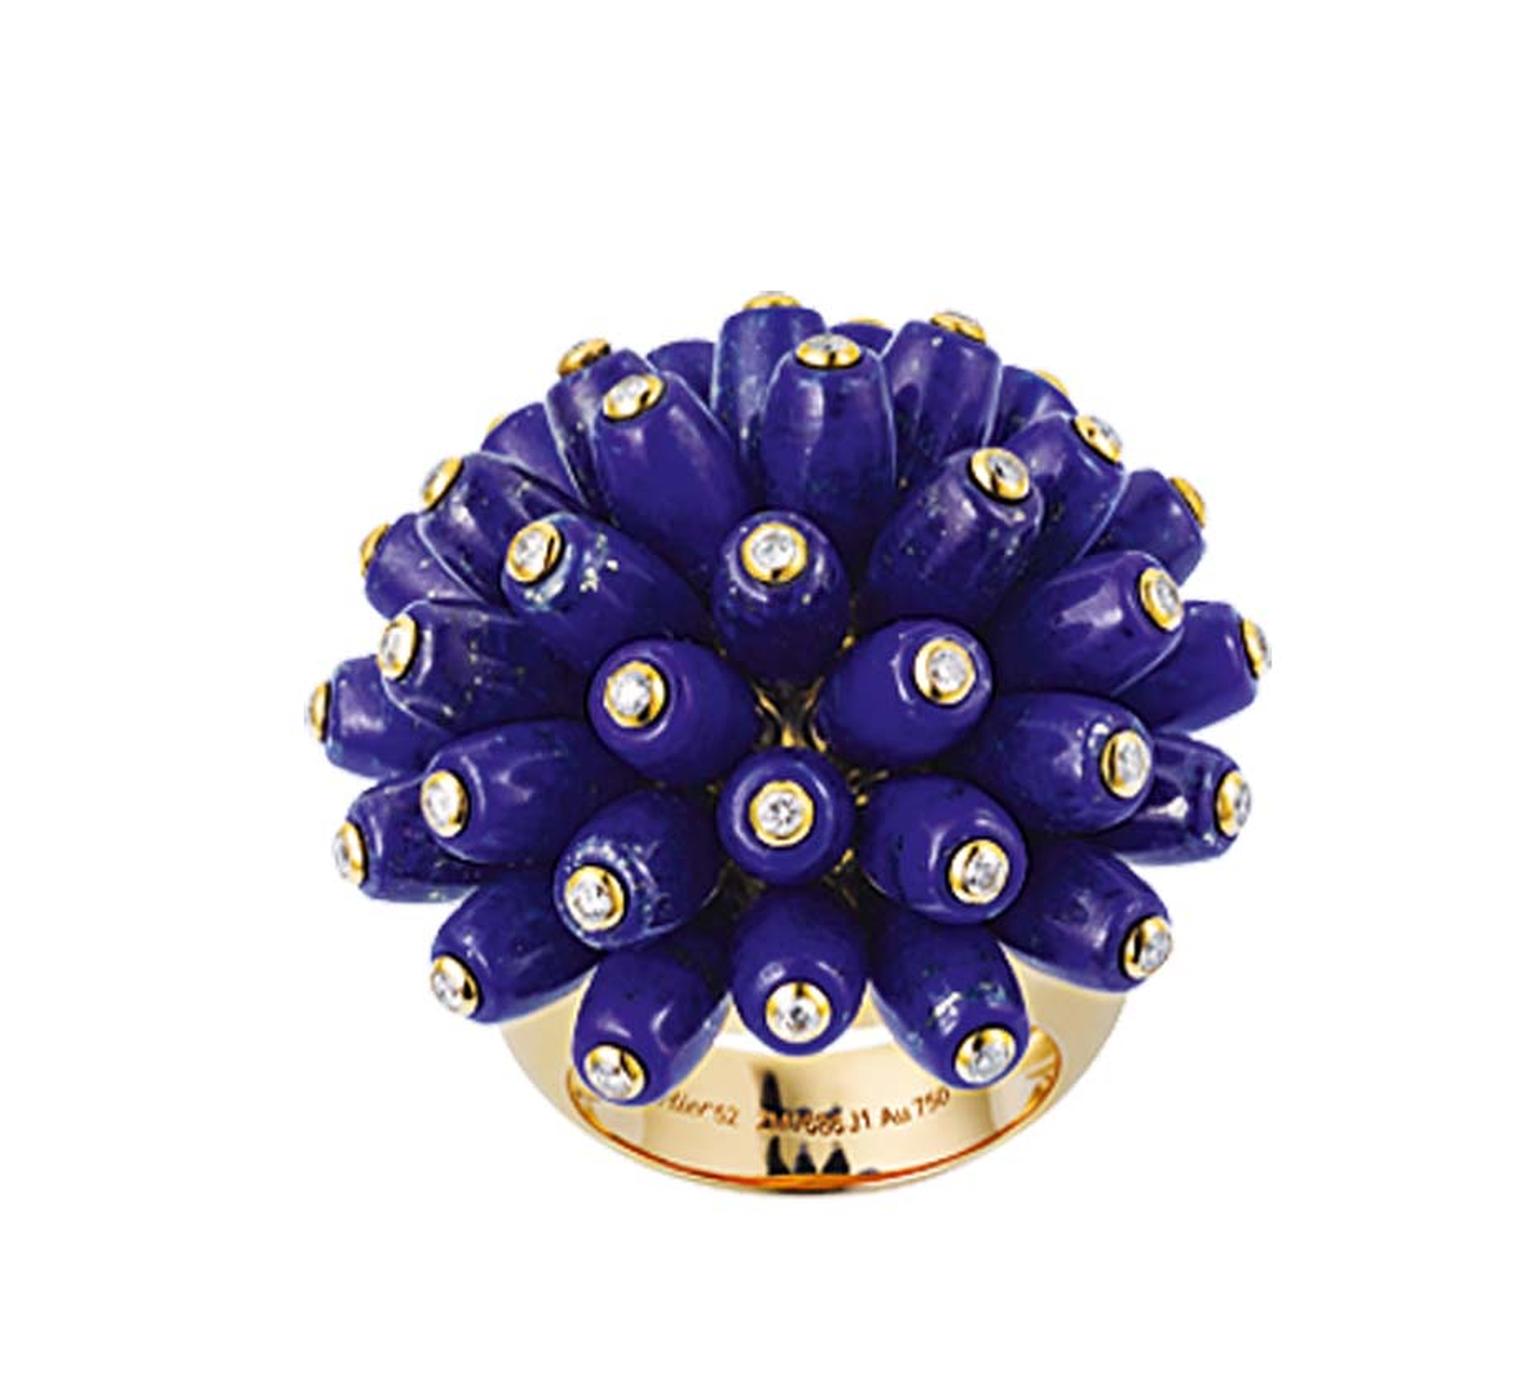 The unique design of this Cartier ring, with its lapis lazuli tubes dotted with diamonds that writhe and wriggle, brings Cartier jewellery bang into the 21st century.